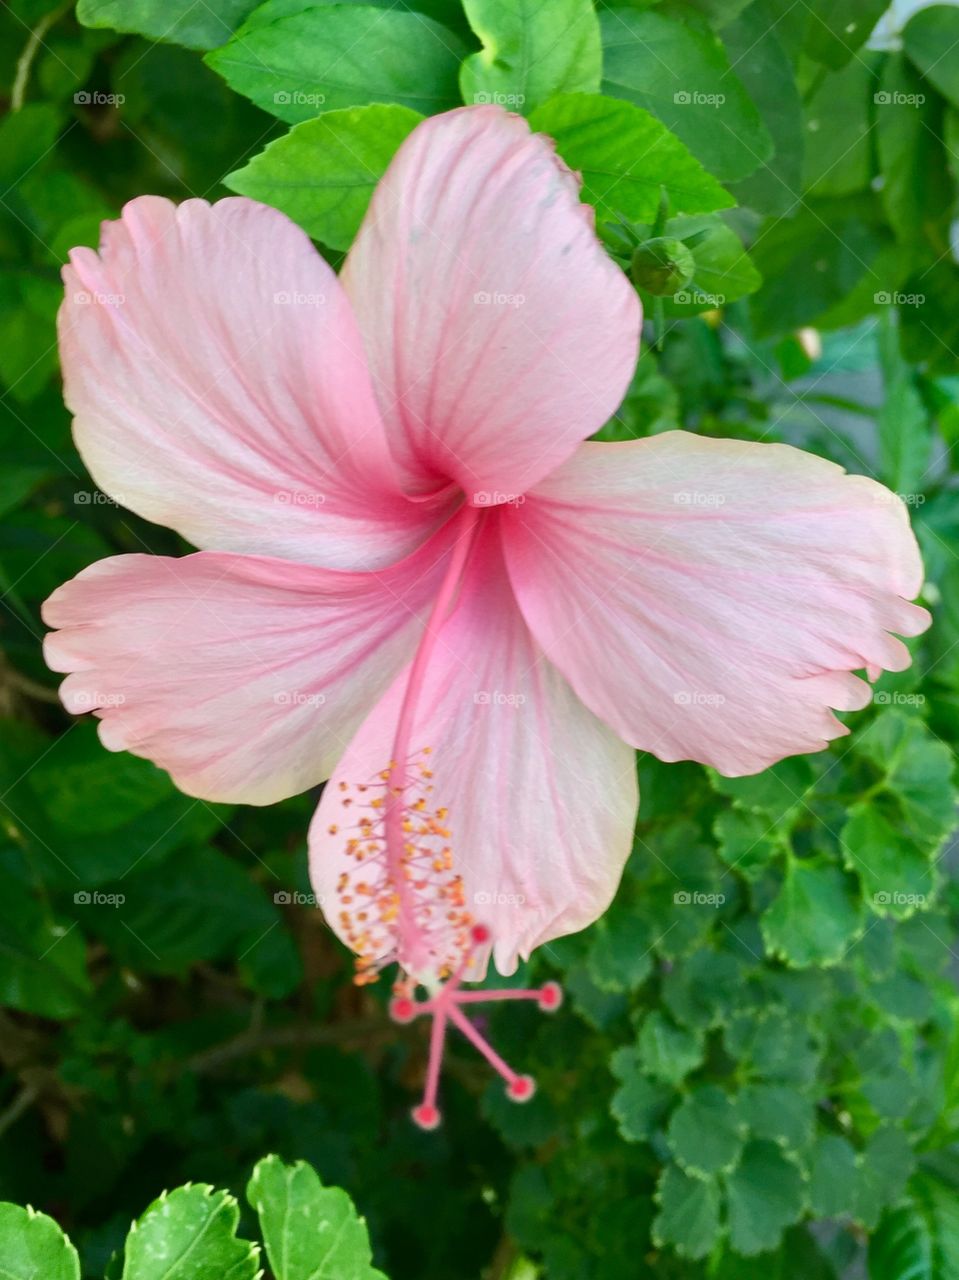 Lovely pink hibiscus flower.